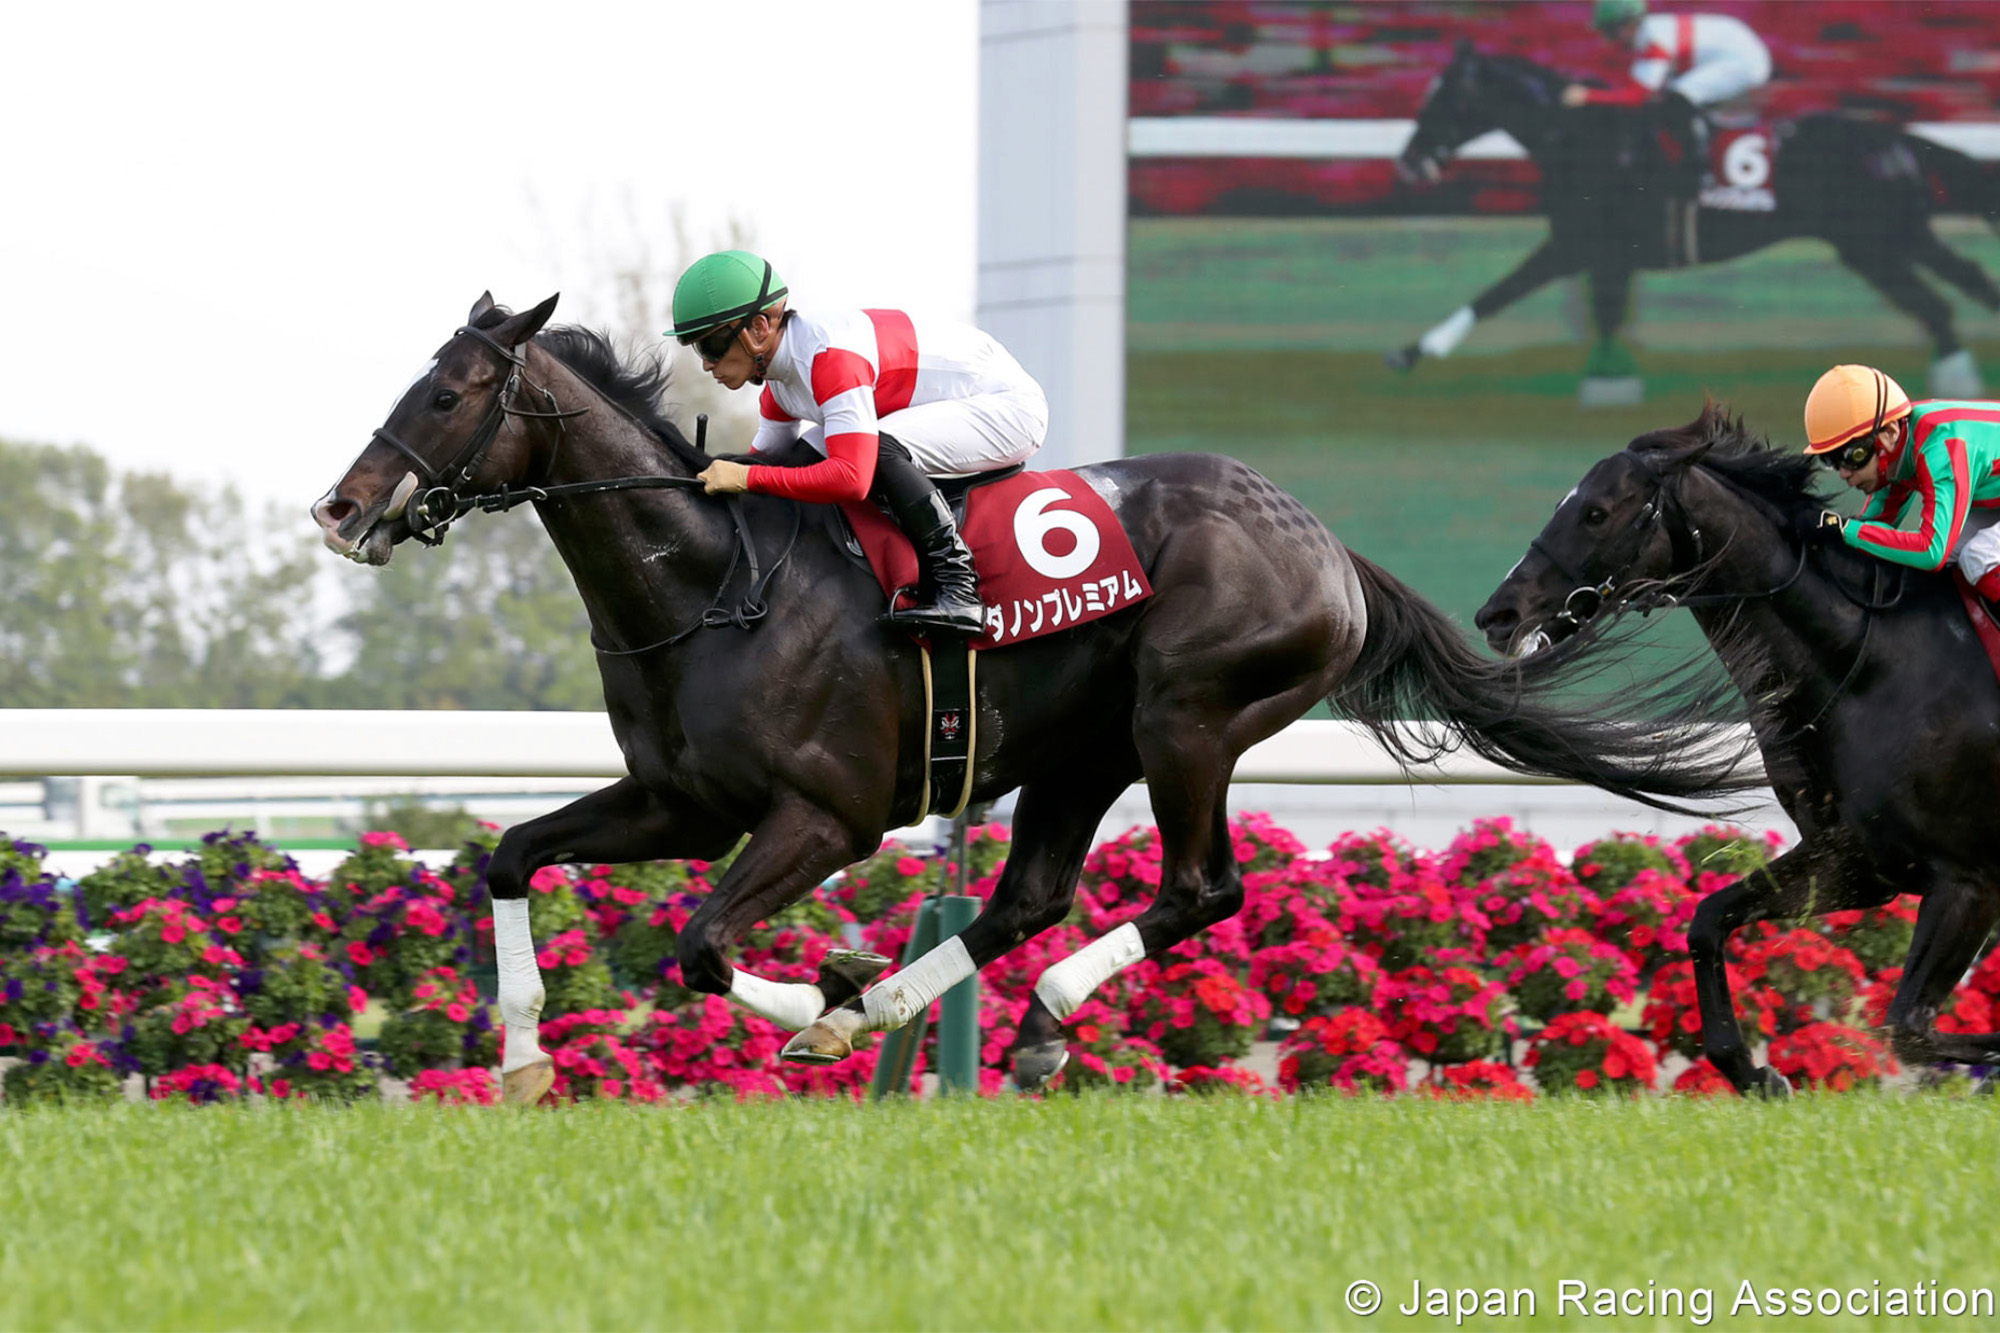 Danon Premium – JPN : G1 winner at two; runner-up to Almond Eye in last year’s G1 Tenno Sho Autumn; also campaign to Australia for third in G1 Queen Elizabeth Stakes.